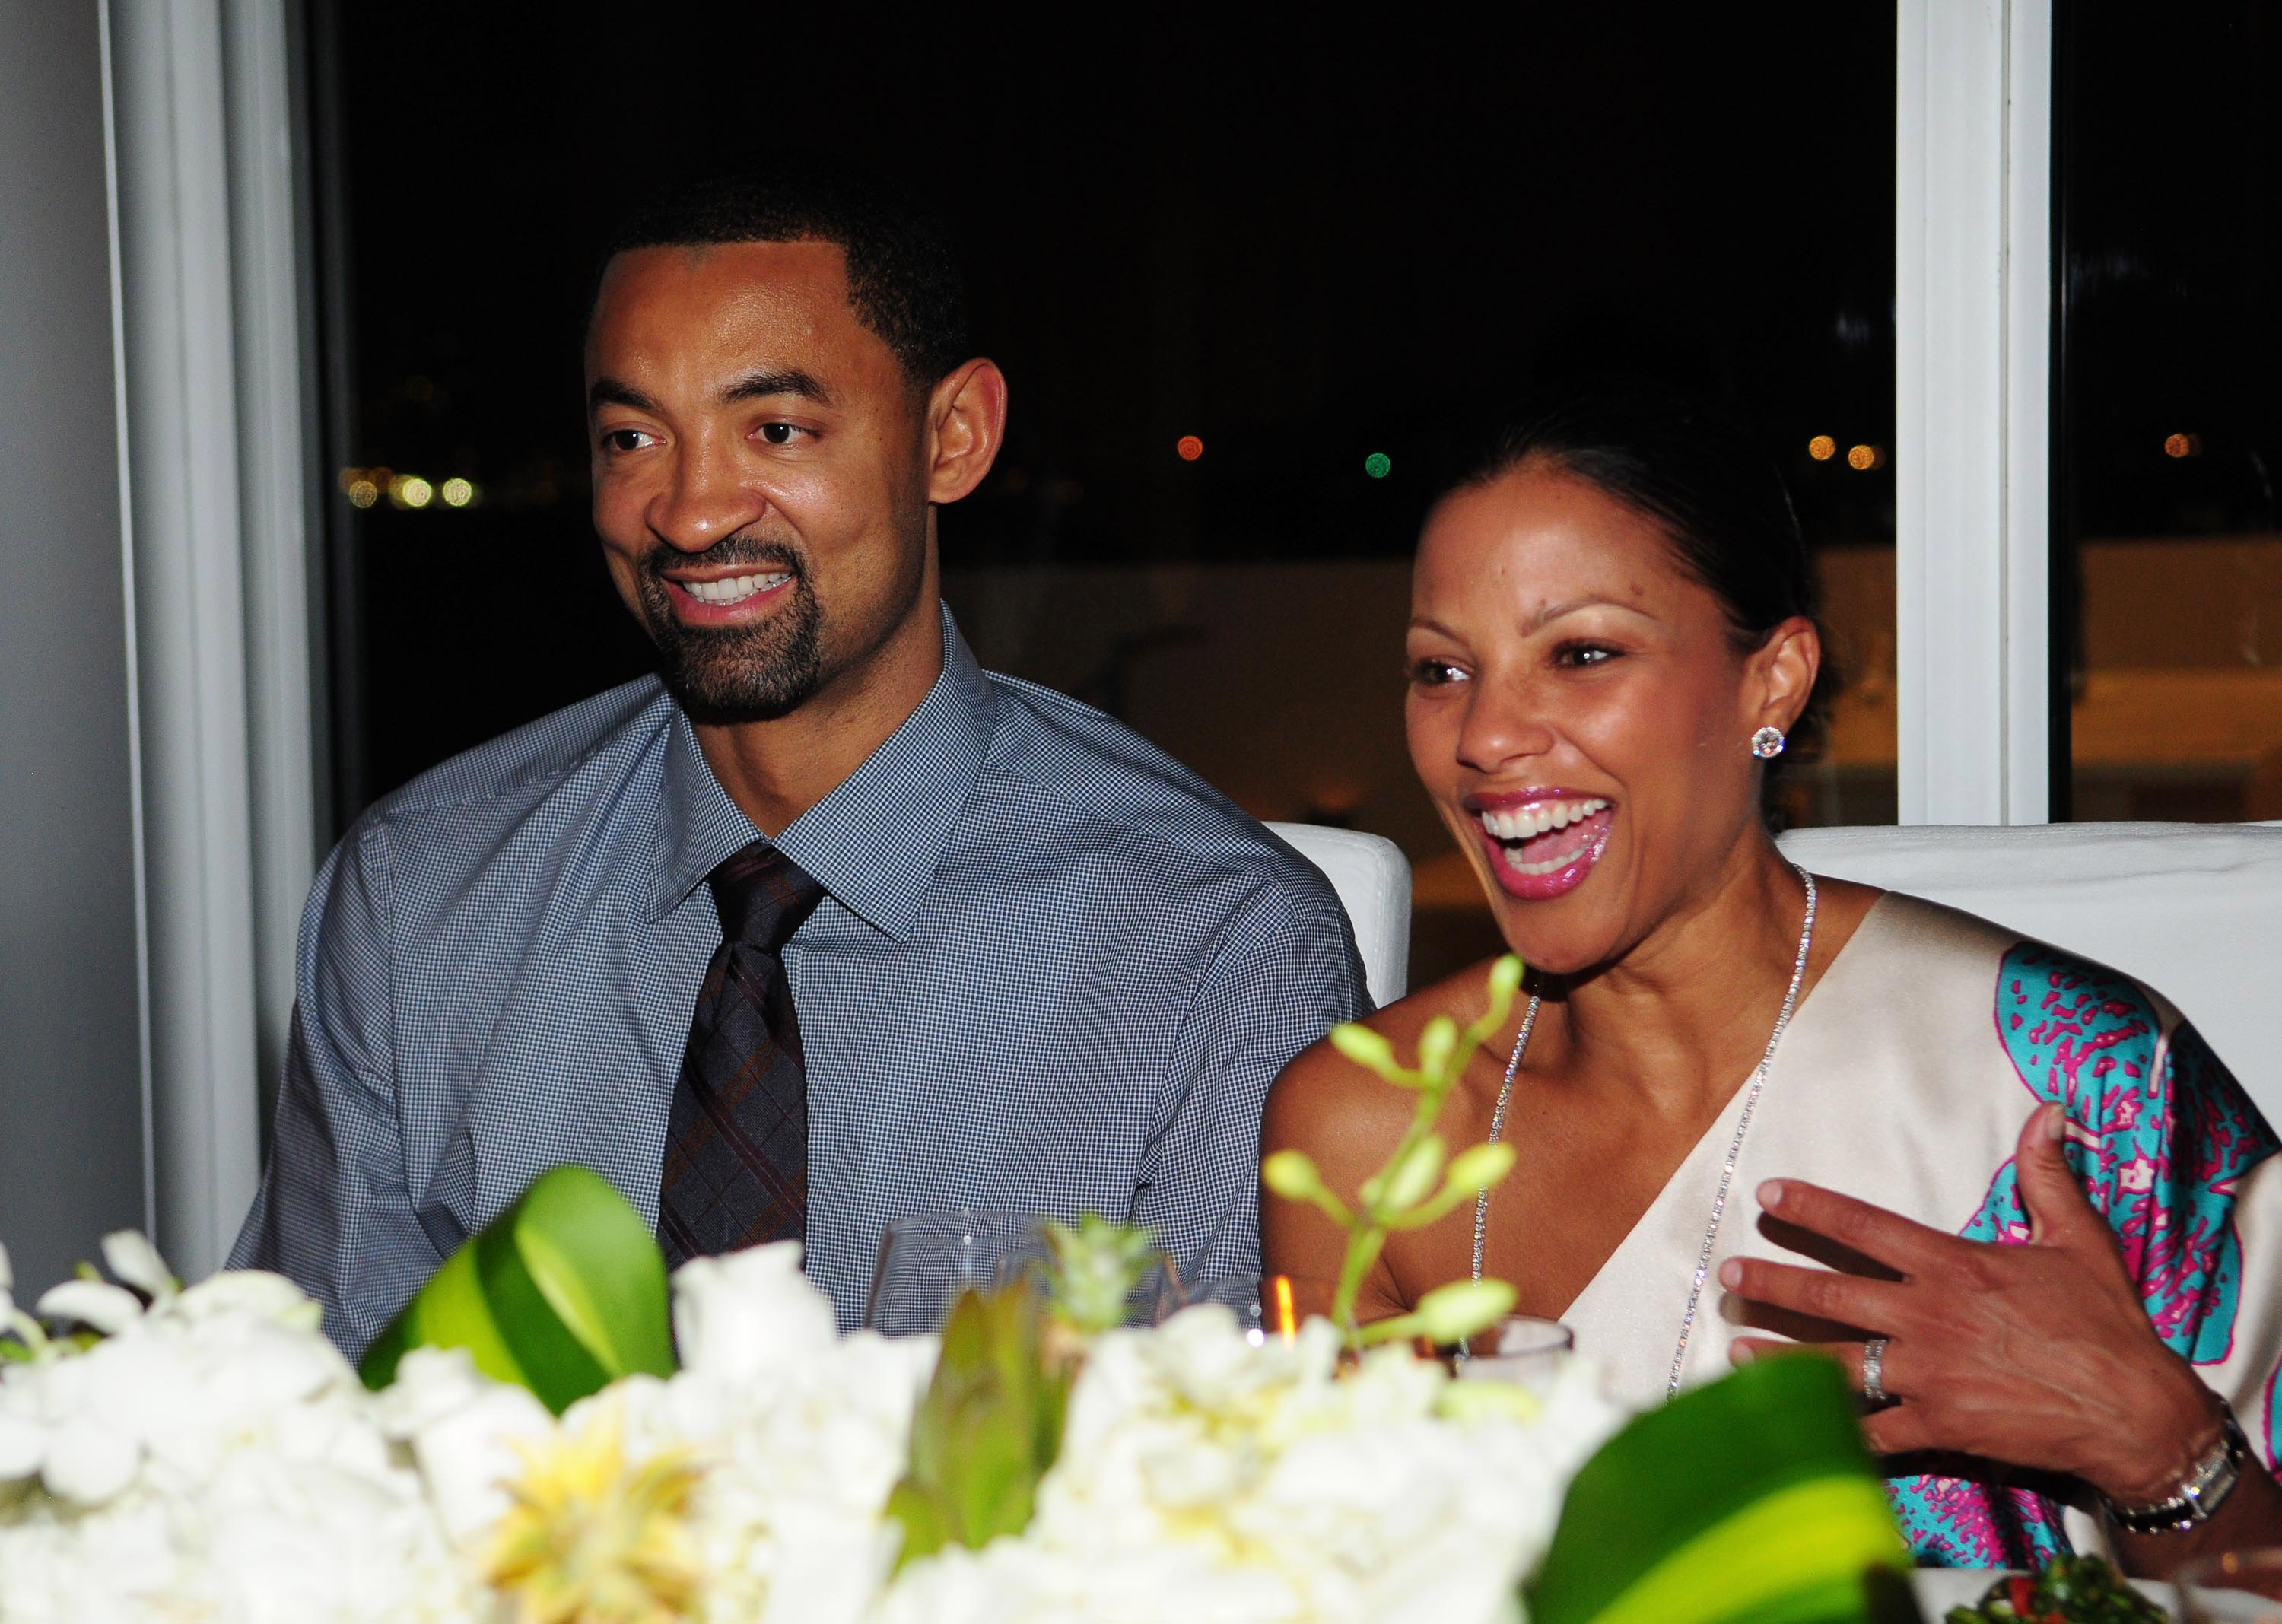 Juwan Howard and his wife Jenine Howard on April 14, 2011, in Miami Beach, Florida. | Source: Getty Images